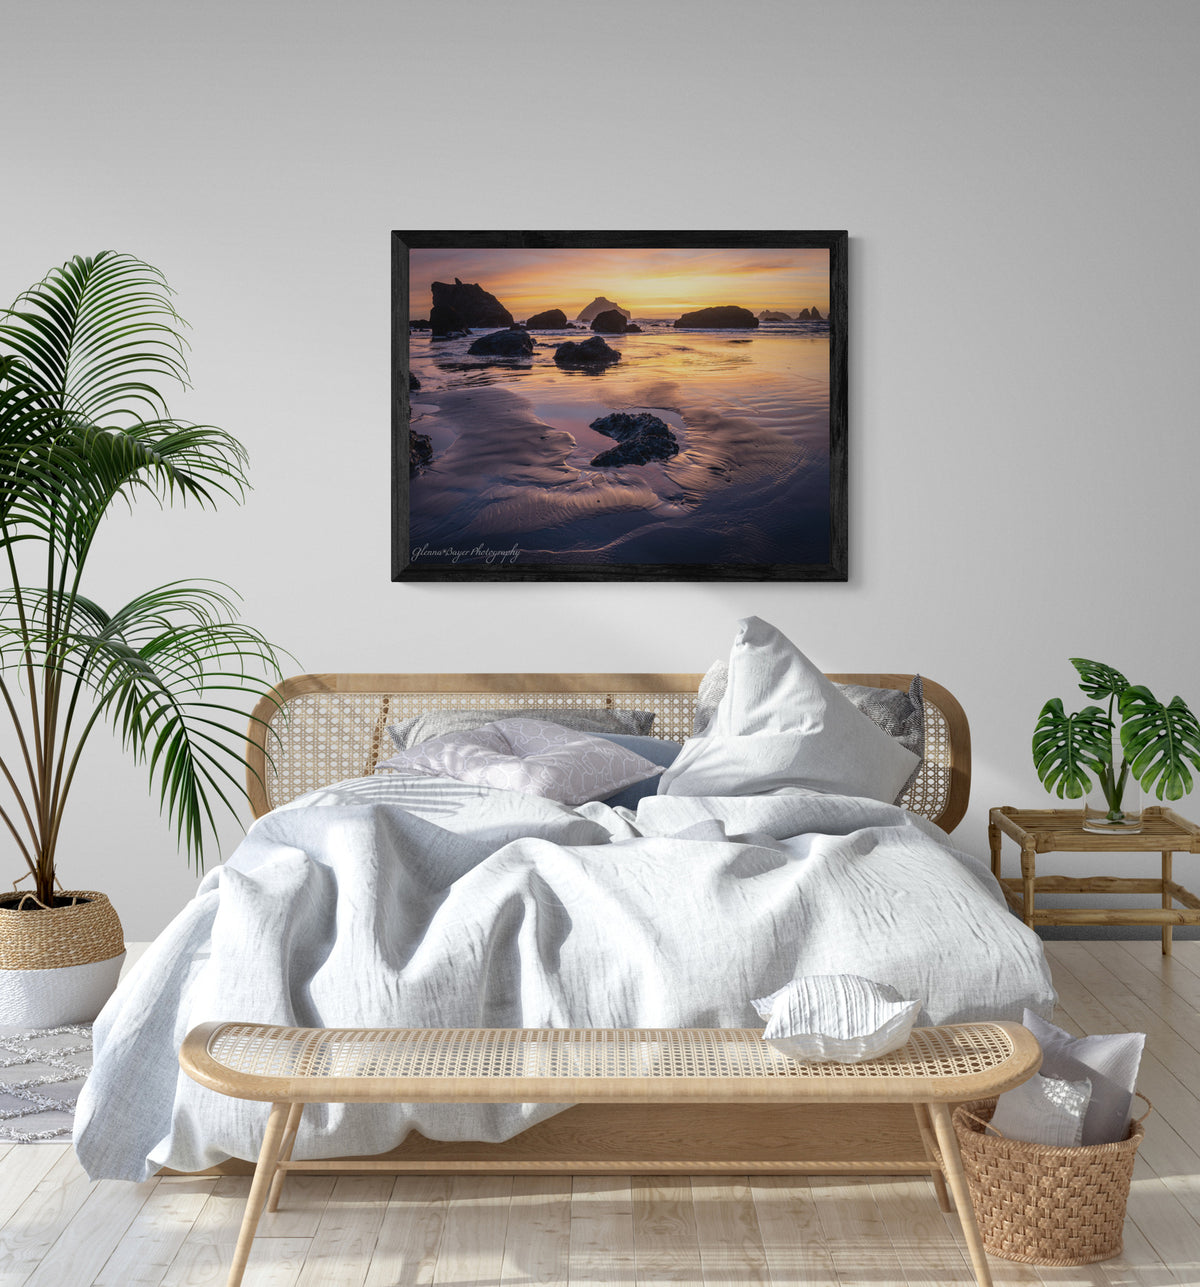 Print displayed on wall in bedroom